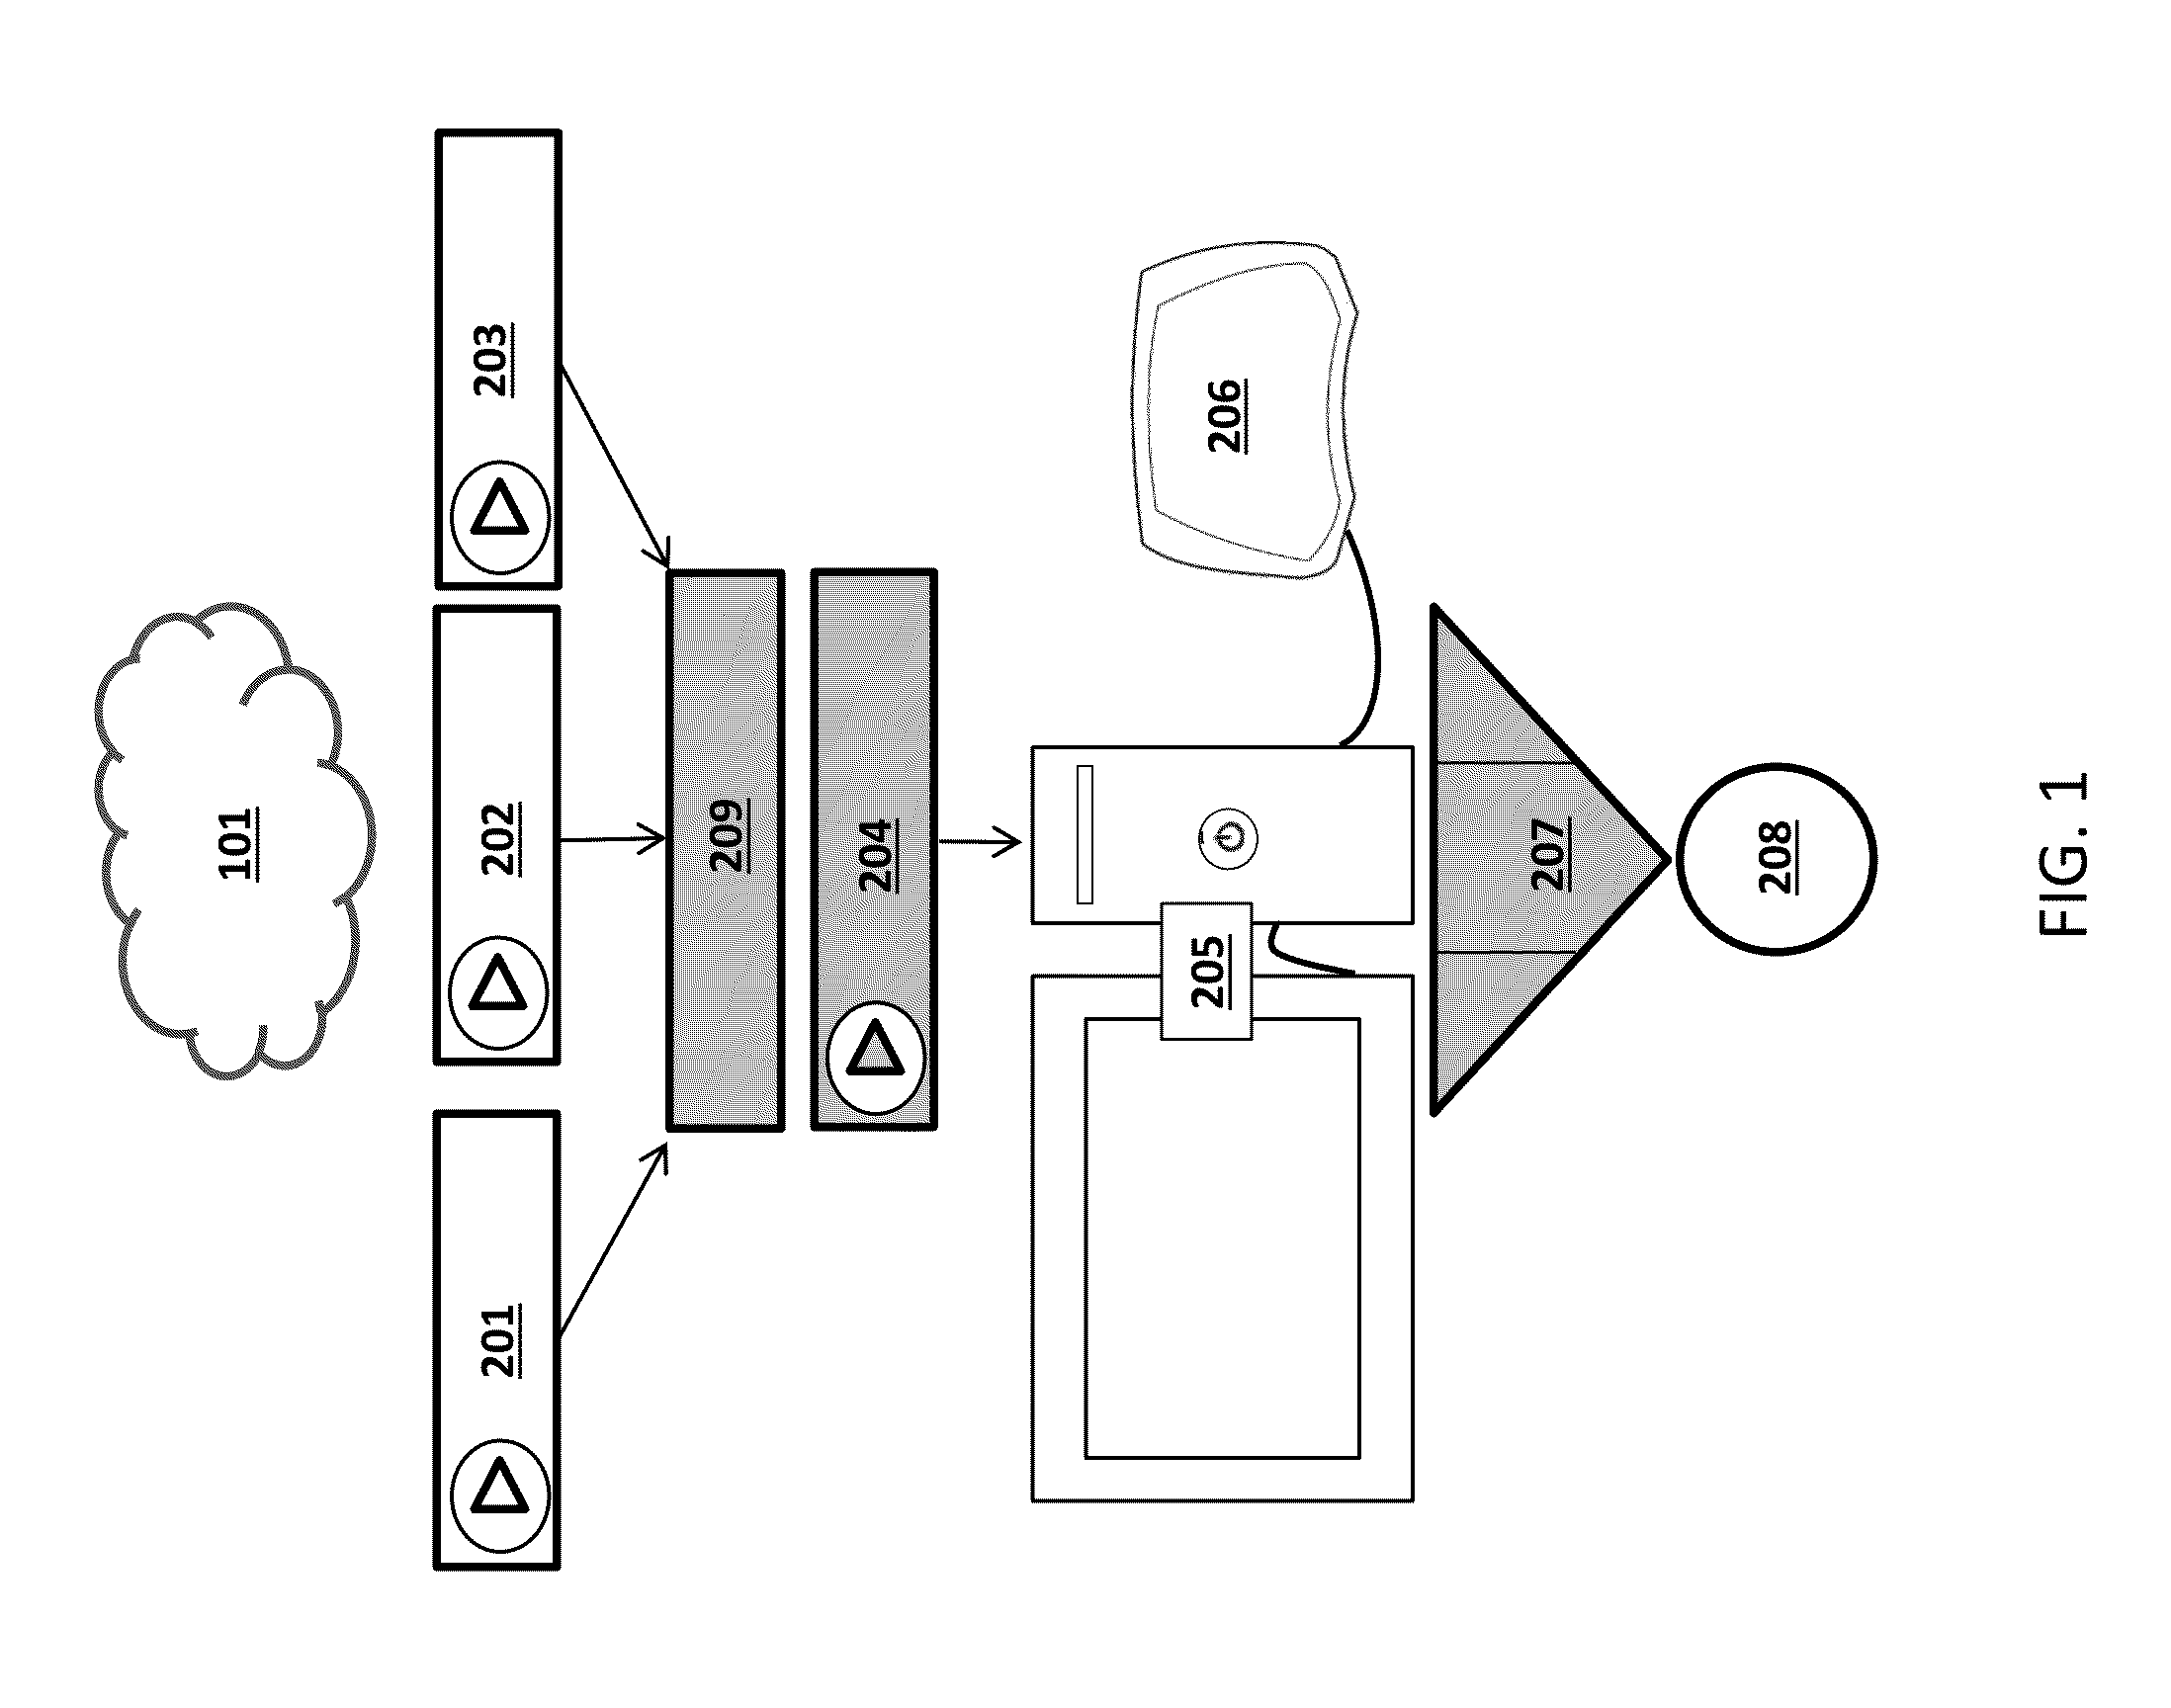 Method of Active-View Movie Technology for Creating and Playing Multi-Stream Video Files